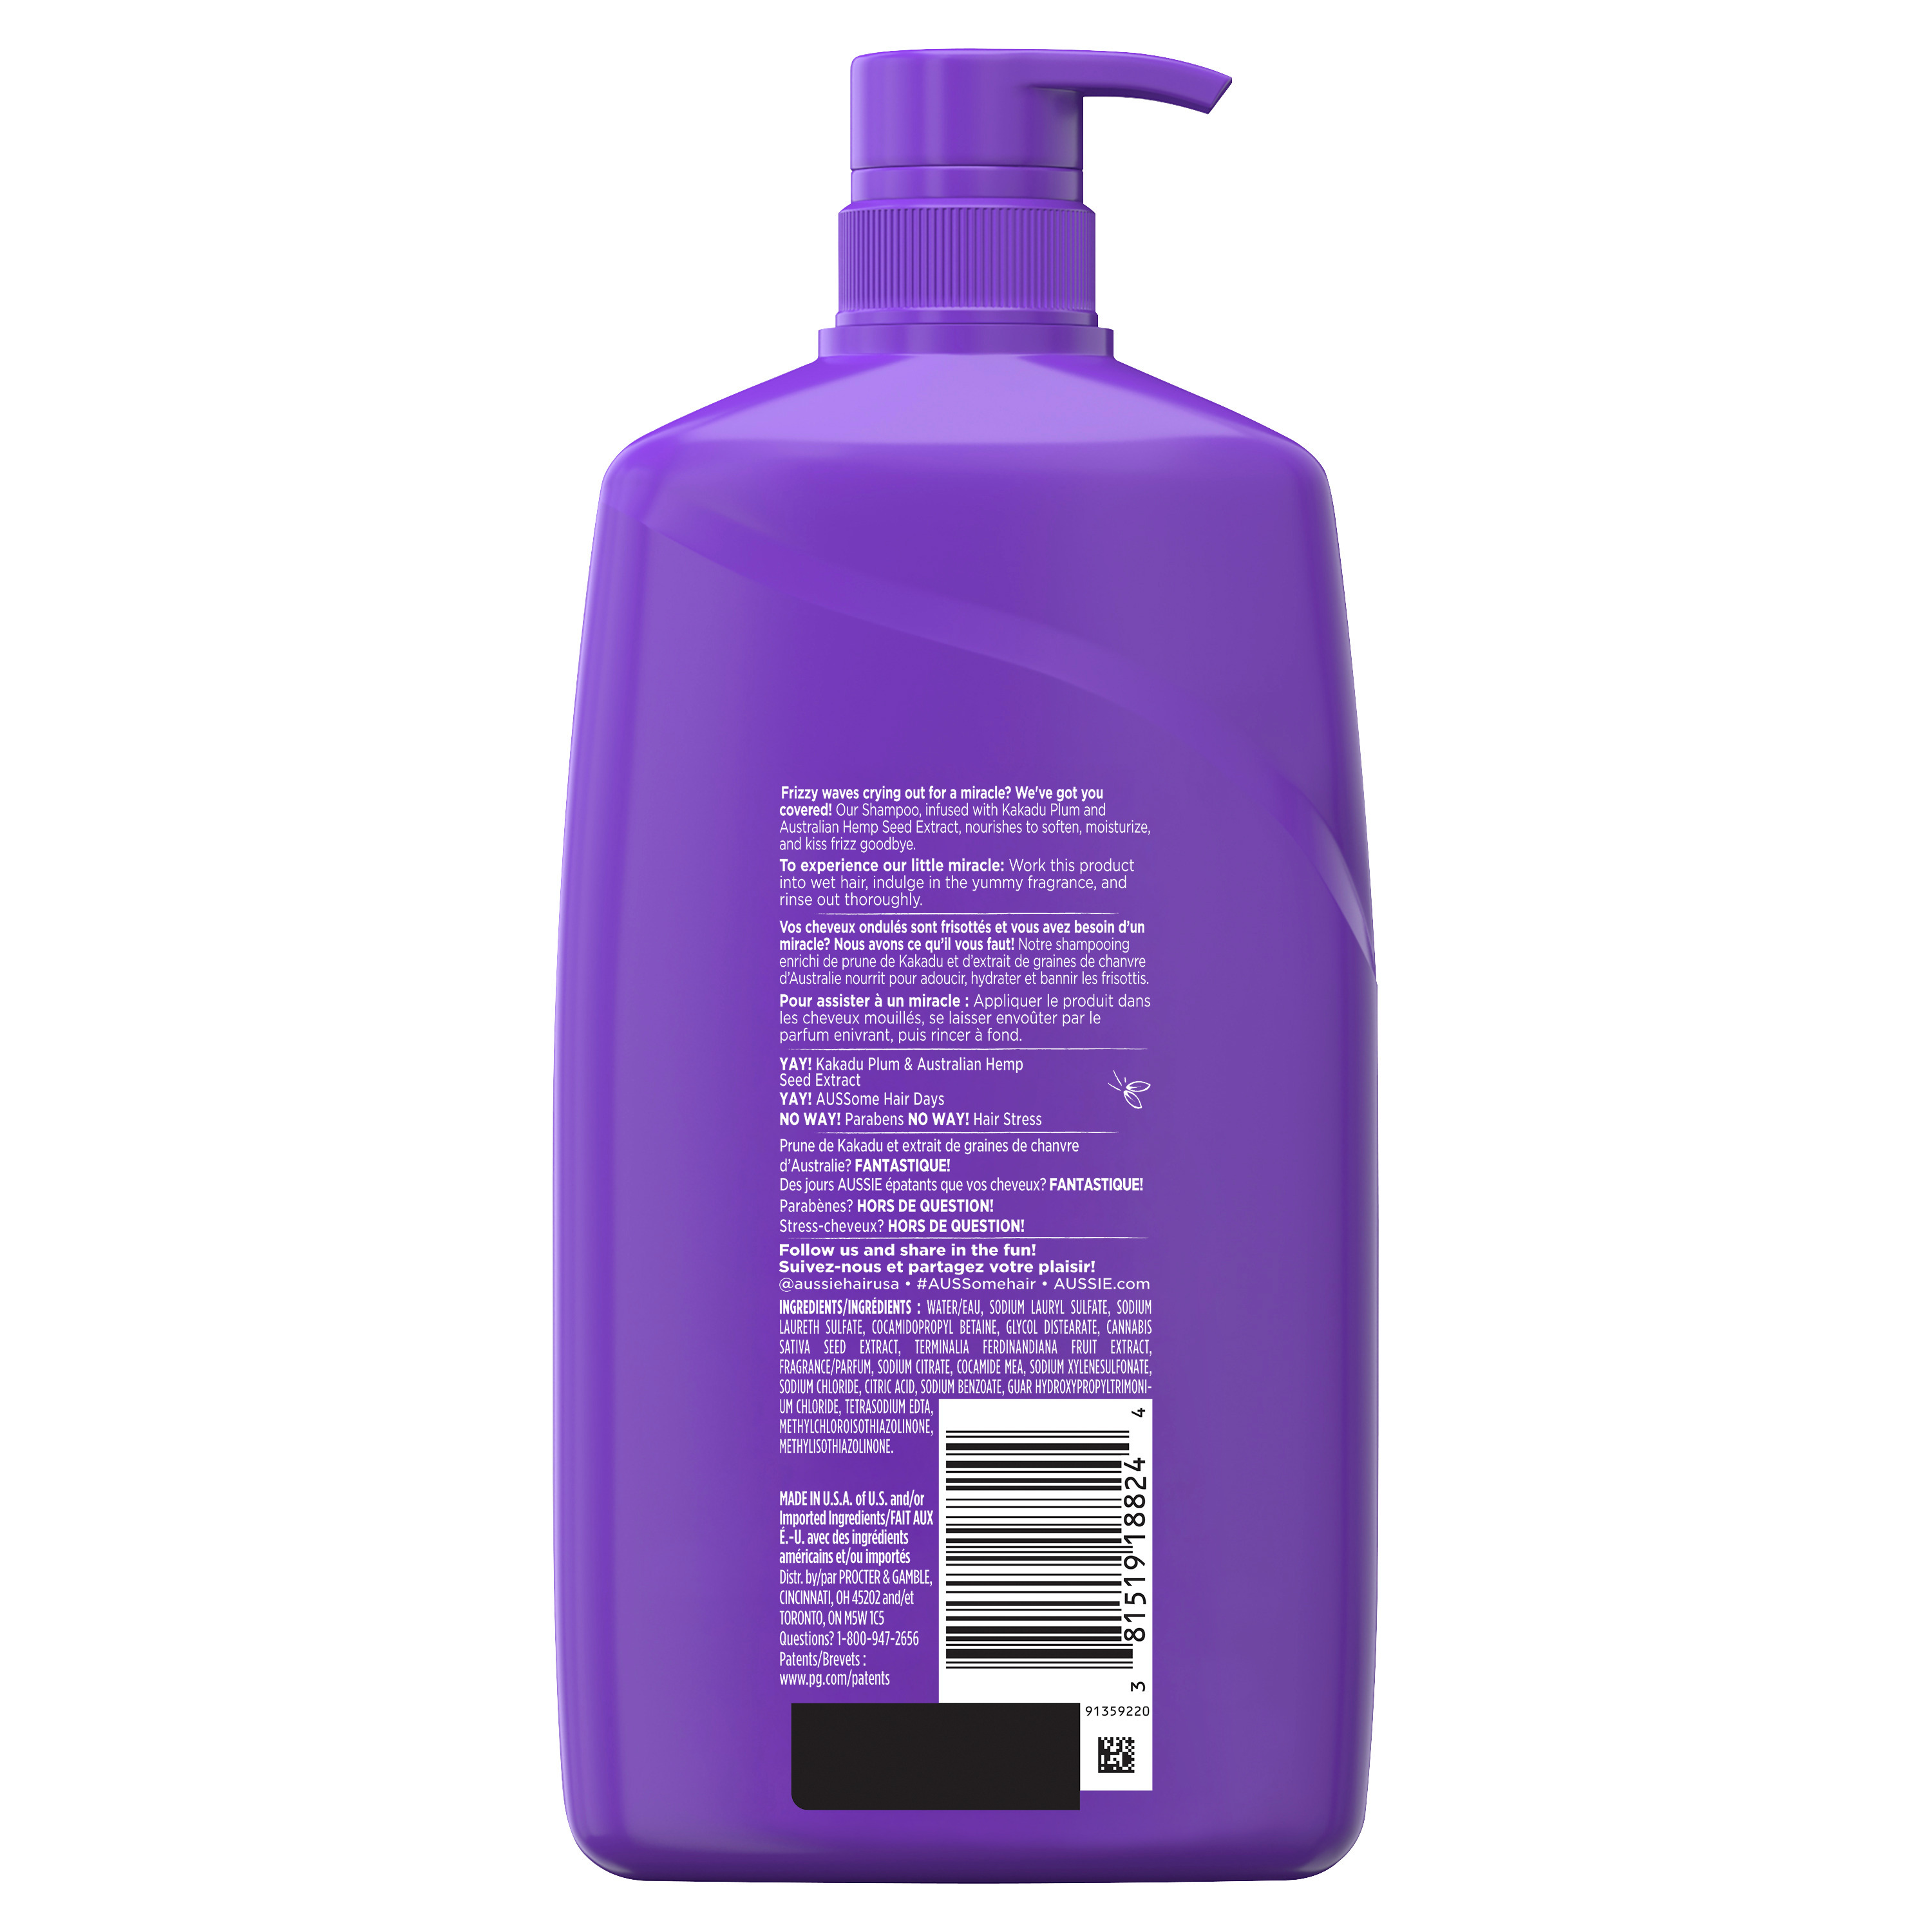 Aussie Miracle Waves Anti-Frizz Hemp Paraben-Free Shampoo, 26.2 fl oz for All Hair Types - image 3 of 8